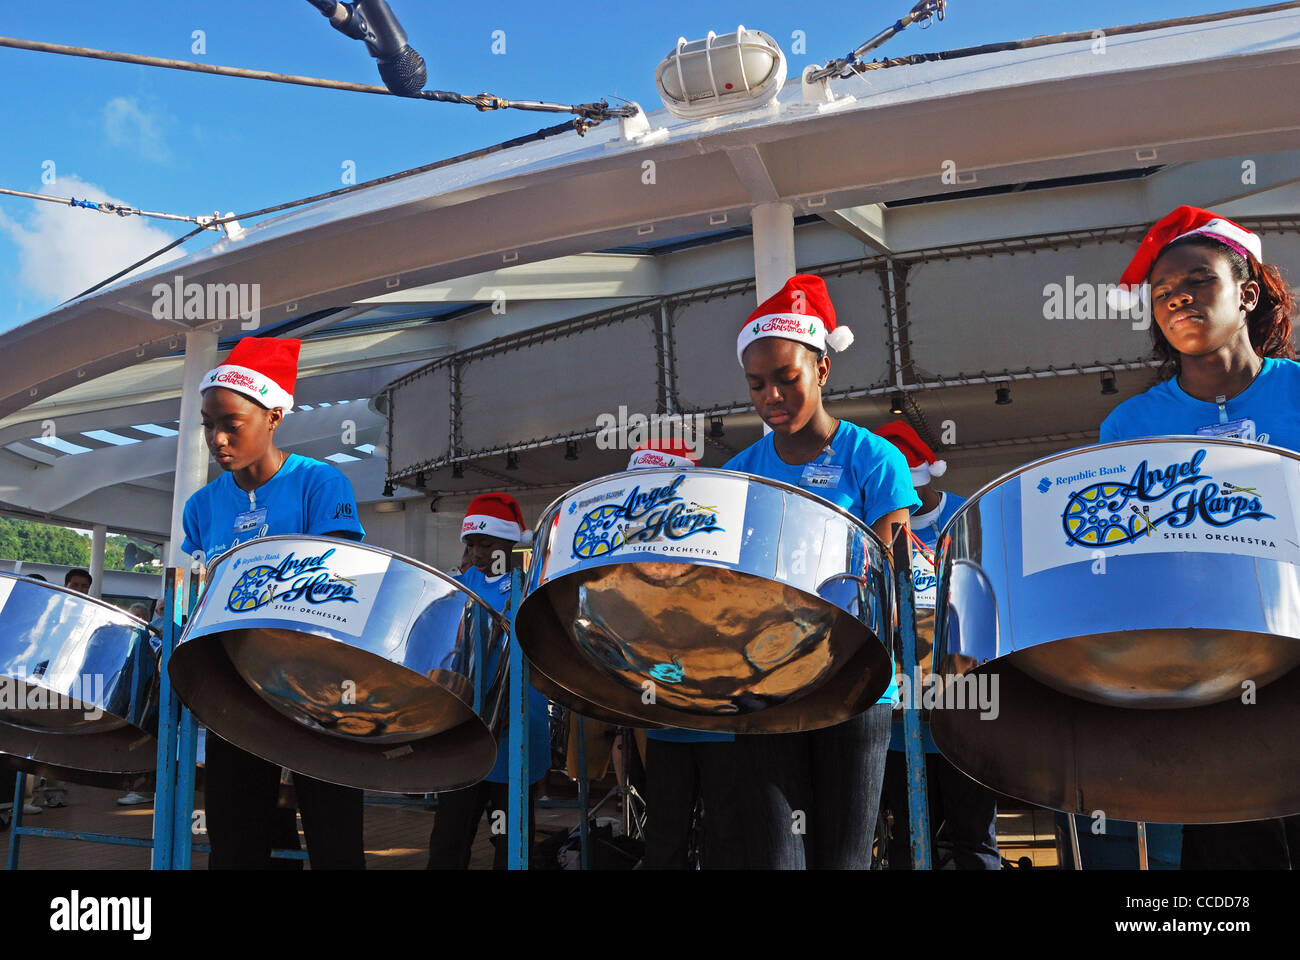 Angel Harps steel orchestra onboard the Braemar cruise ship, St. George’s, Grenada, Caribbean, West Indies. Stock Photo